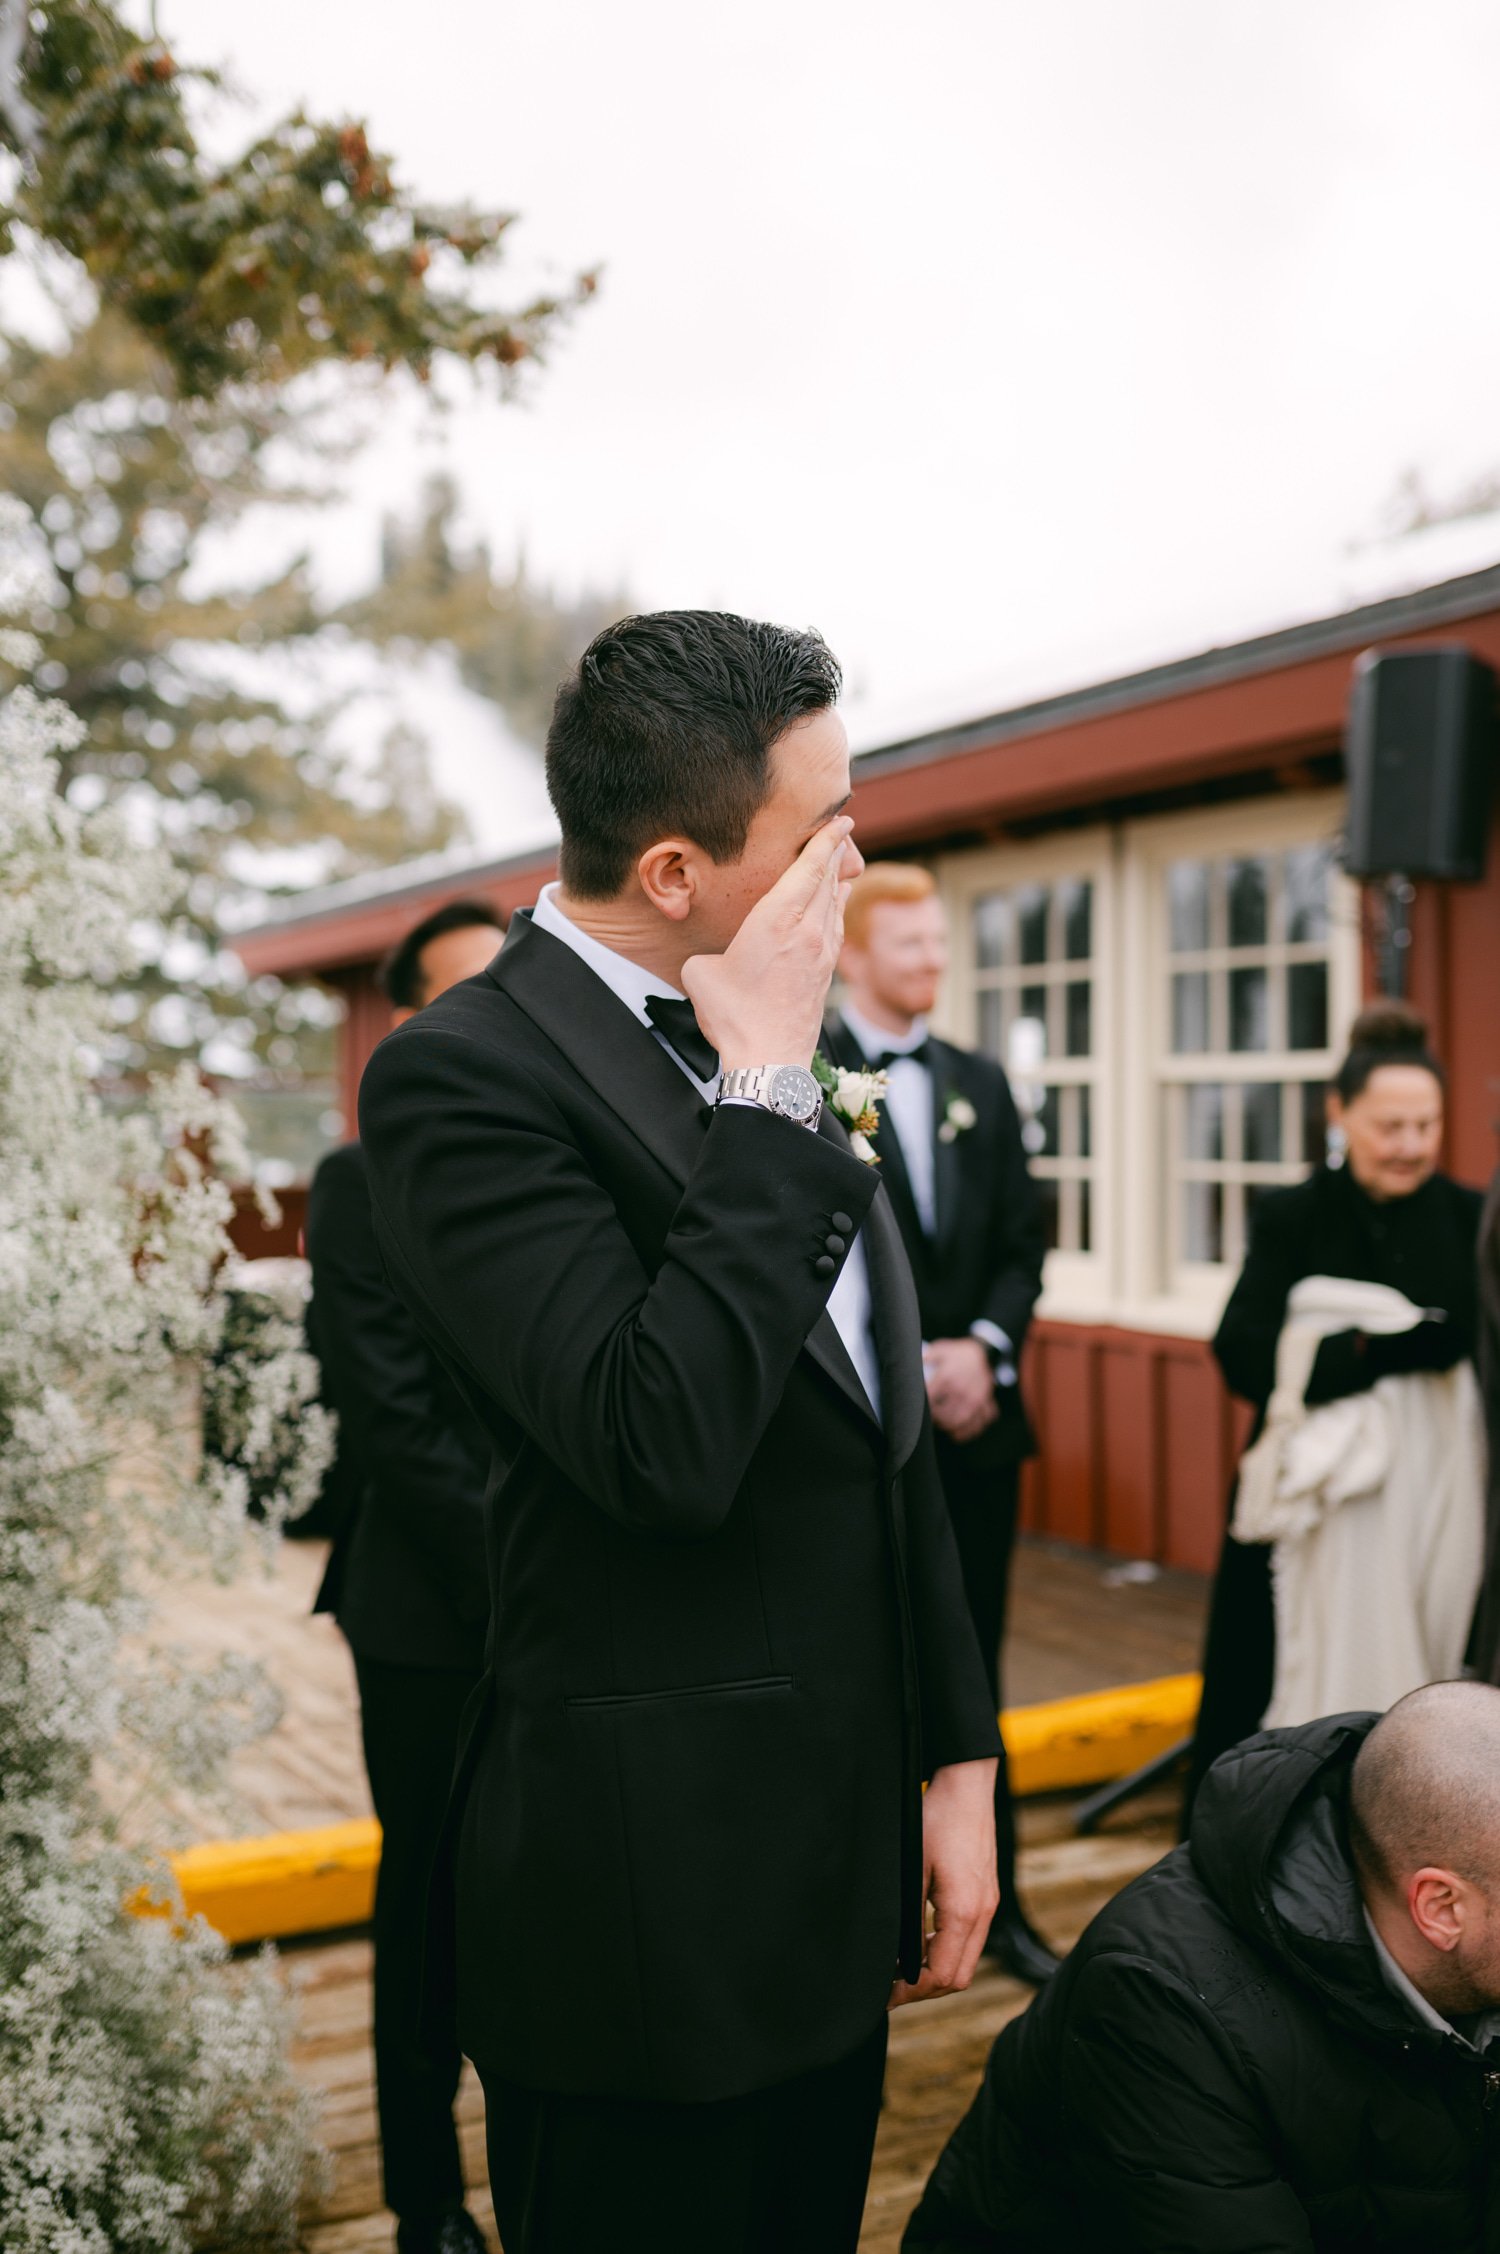 Sun Valley Roundhouse Wedding photos of the groom being emotional while the bride is walking down the aisle